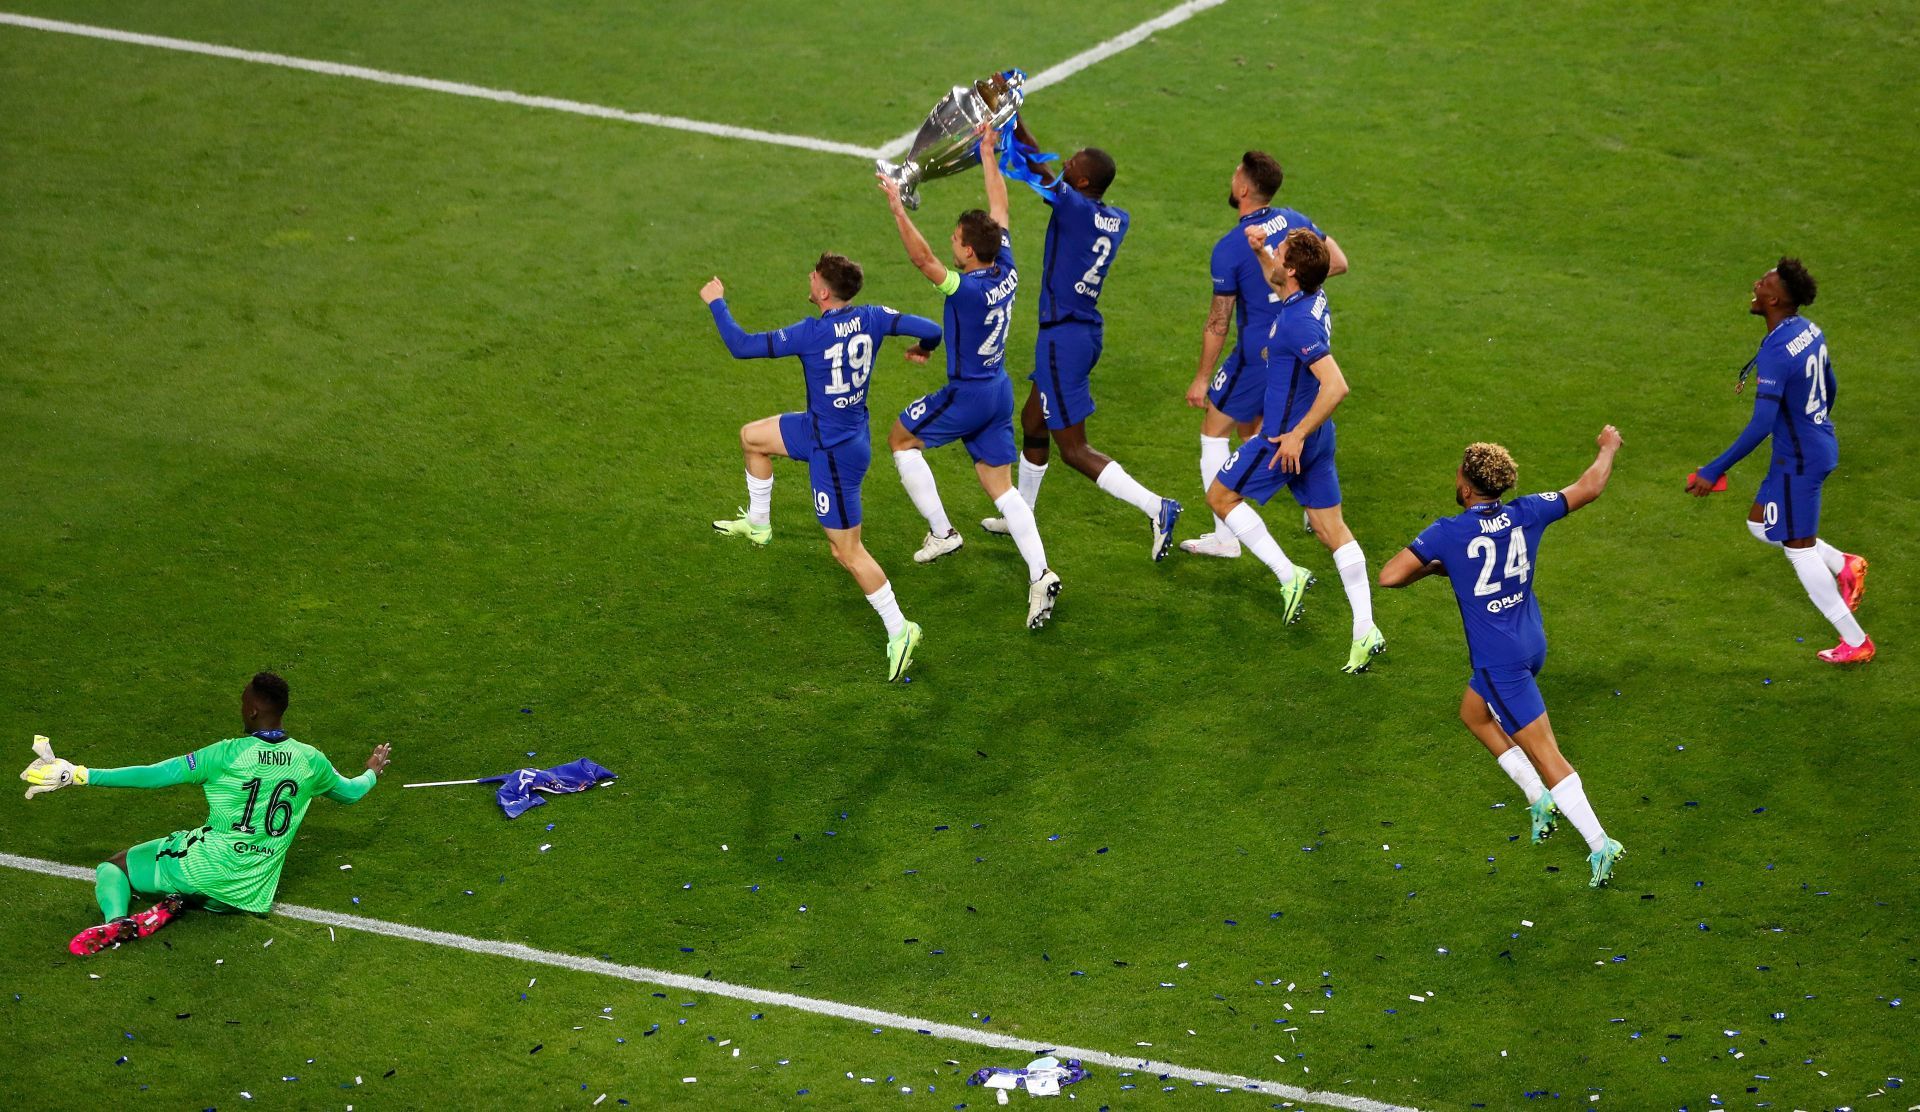 Chelsea players salute the fans after their 2021 UEFA Champions League final win.